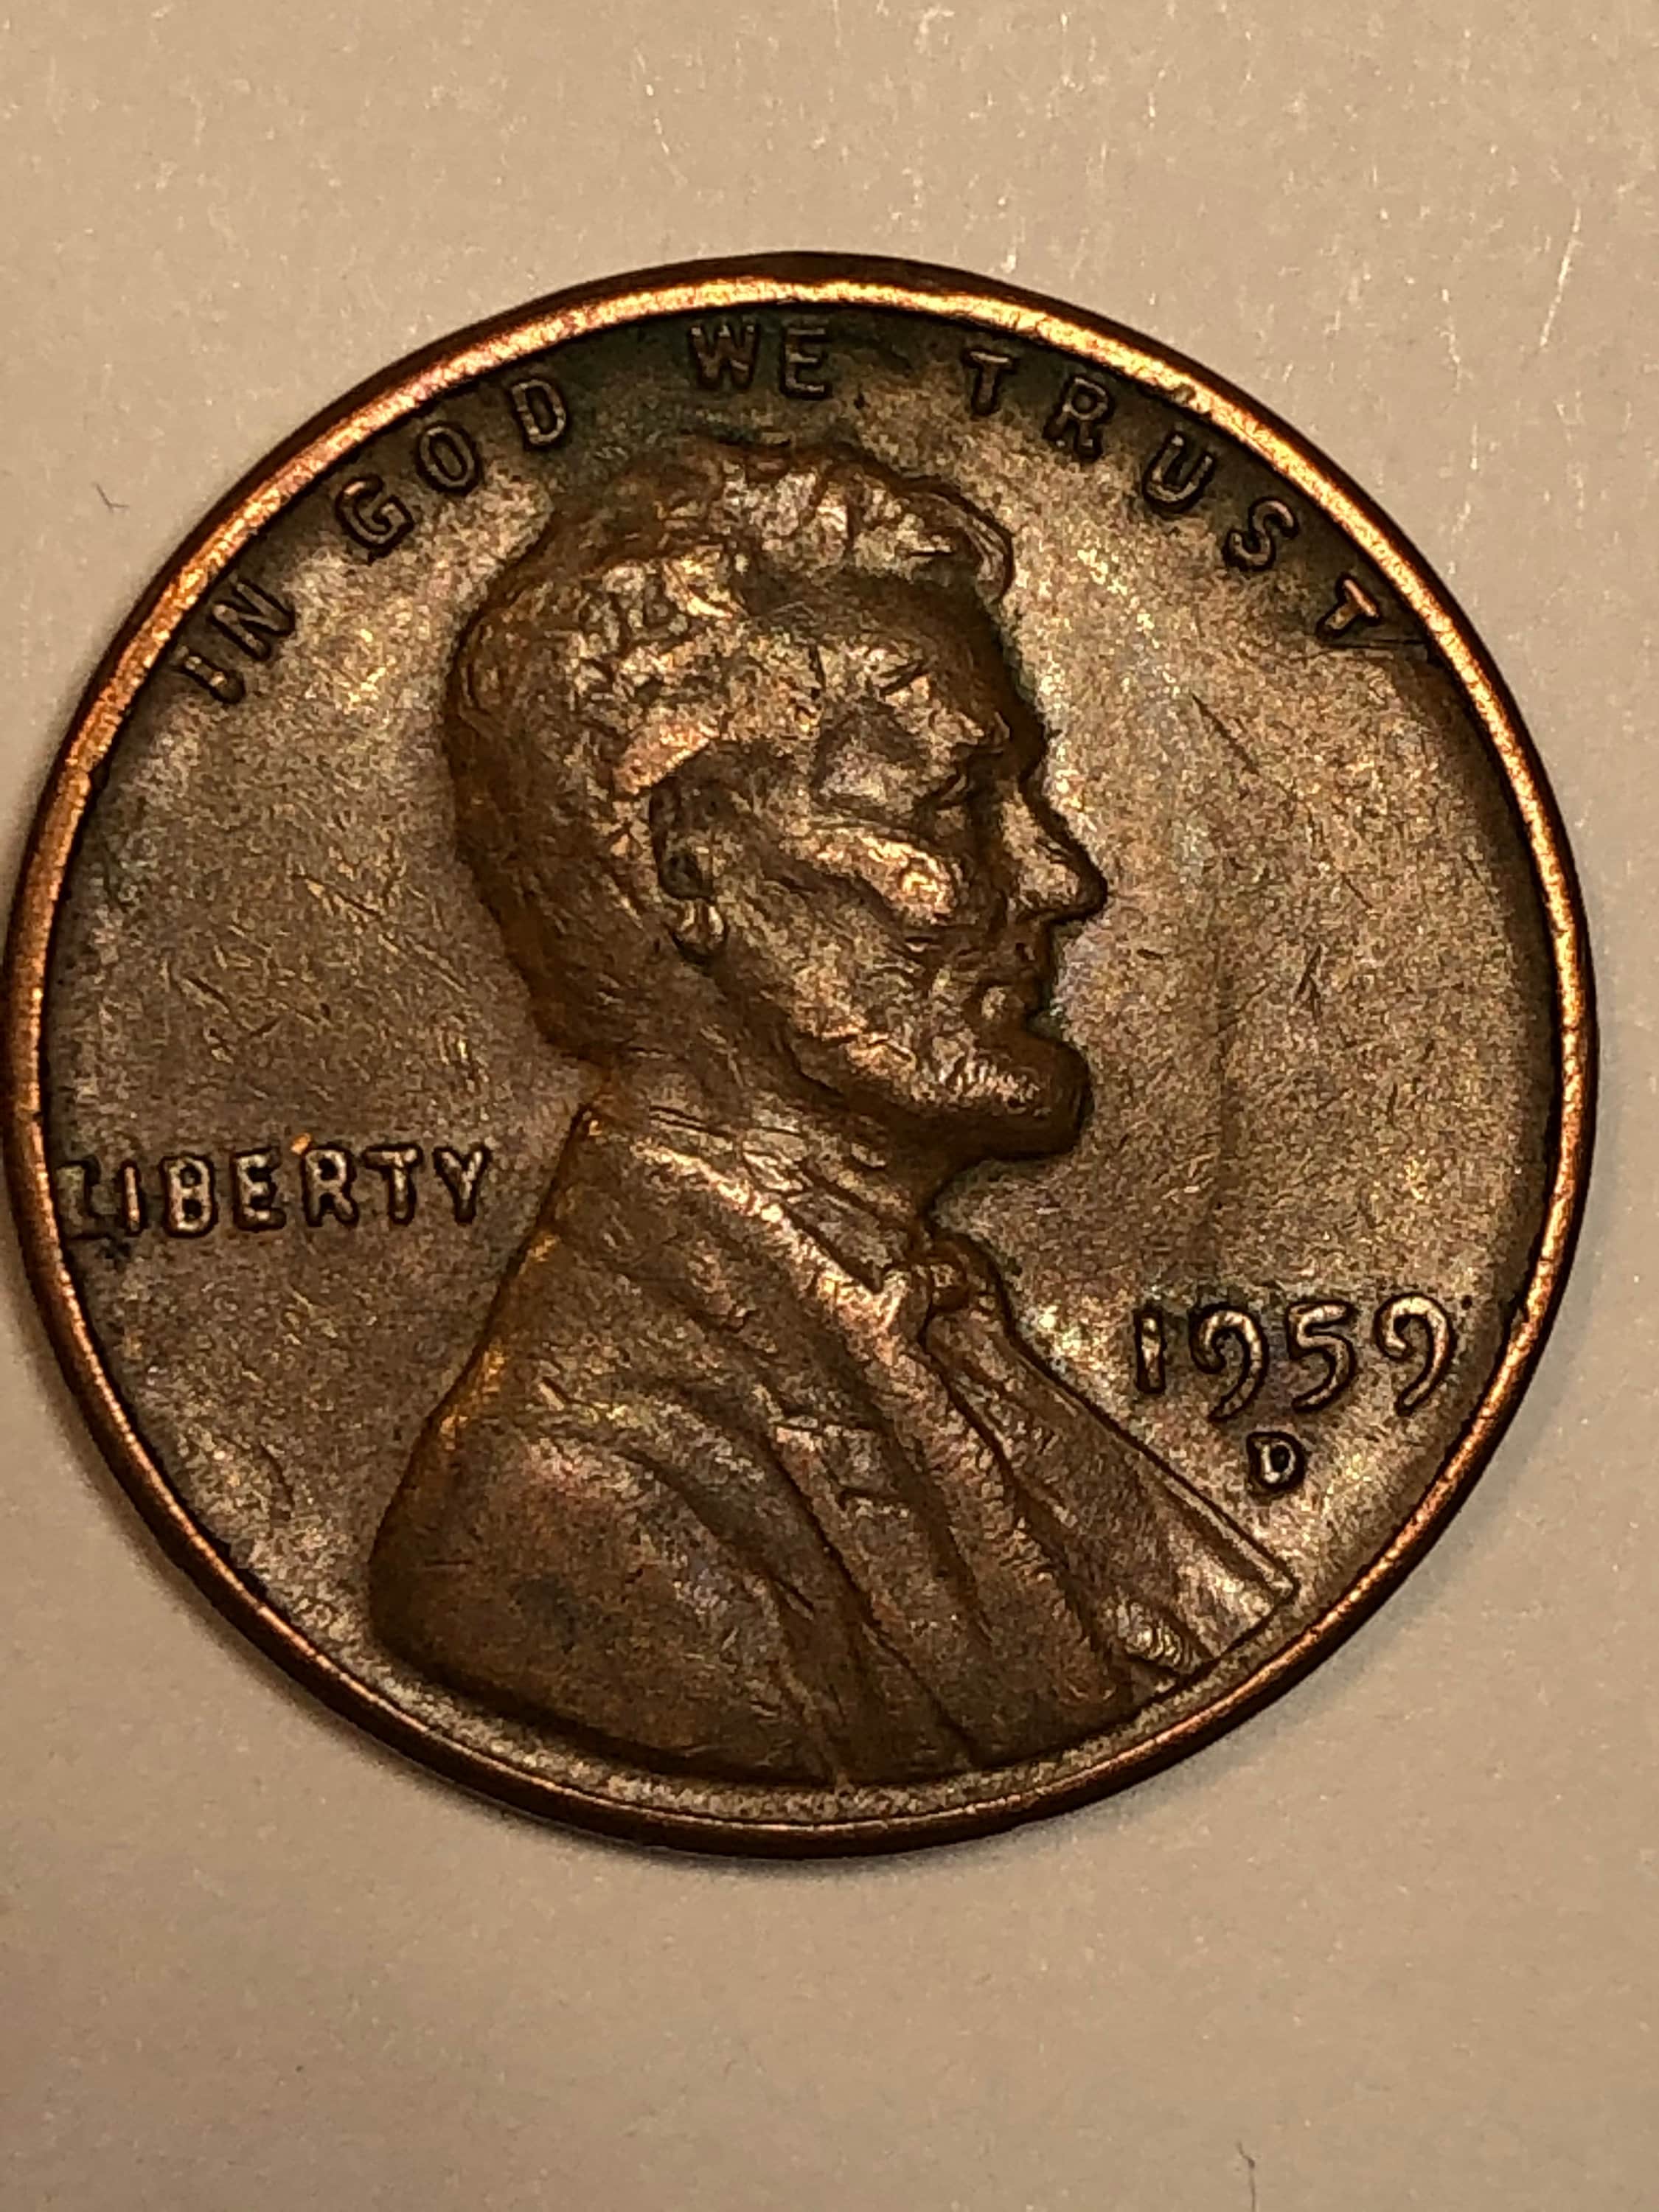 1959 D Lincoln BN Cent Containing Interesting and Unusual Features for ...